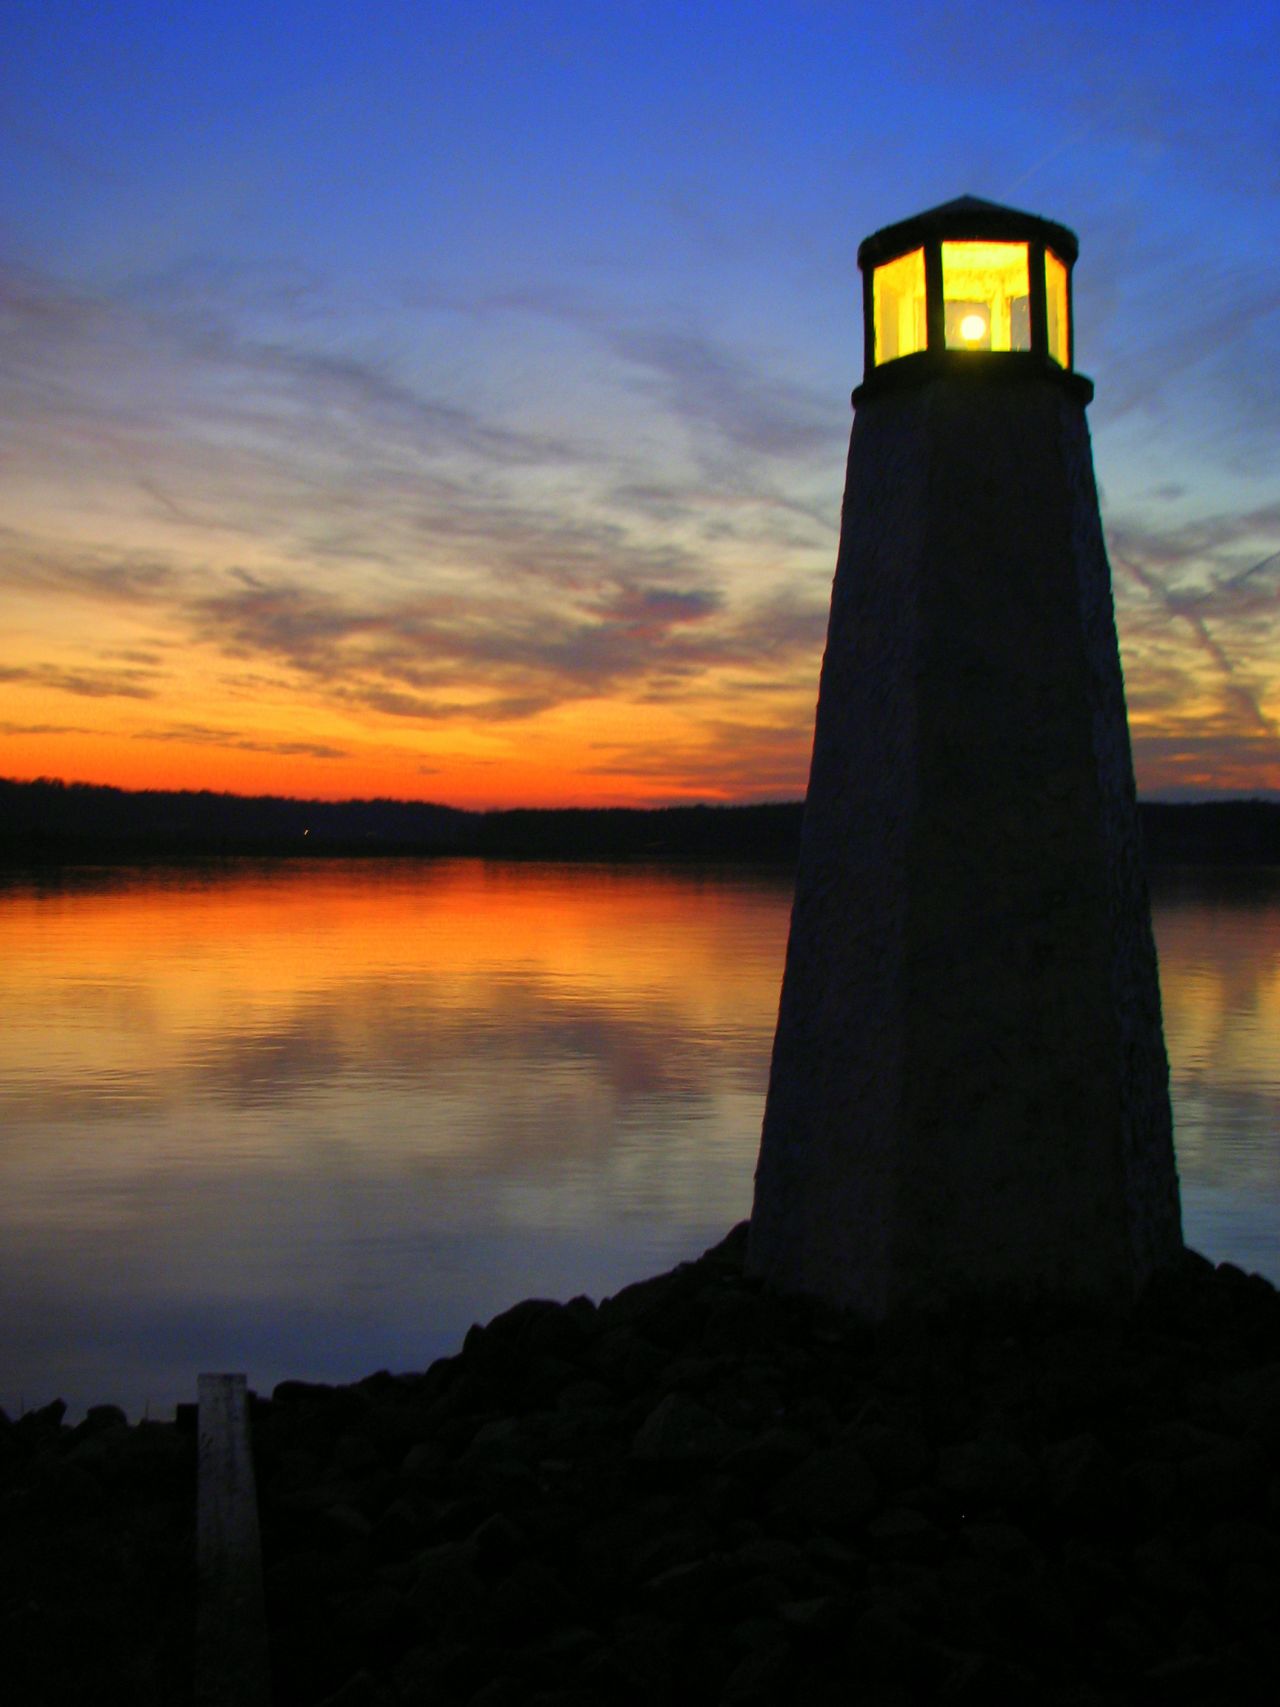 <a href="http://ireport.cnn.com/docs/DOC-798469">Ryan Duckwitz</a>'s beautiful sunset photo of the Lake Anna, Virginia, lighthouse from 2010 was a matter of the right place and right time: "I saw the great lighting and the sun going down so I told my parents to stop to see if I could grab a few quick photos," said the 27-year-old. "I knew that there was a lighthouse where I told my parents to stop, so it turned out to be perfect timing."